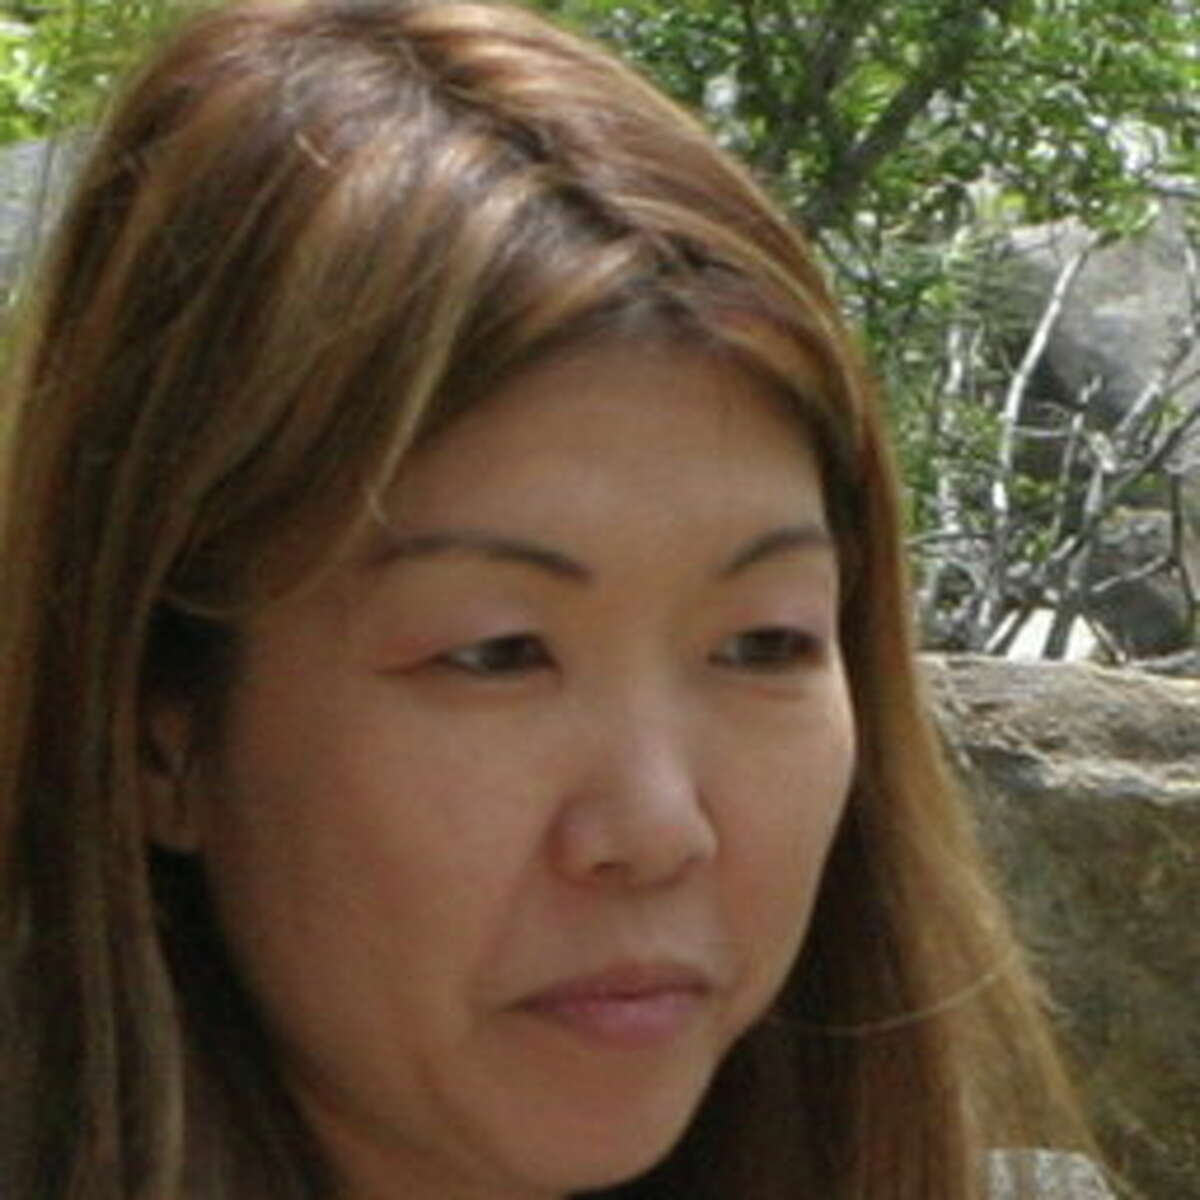 Chie Kawabata, pictured in a family photo. Kawabata is believed to have kidnapped her son Maximus and taken the boy to Japan.